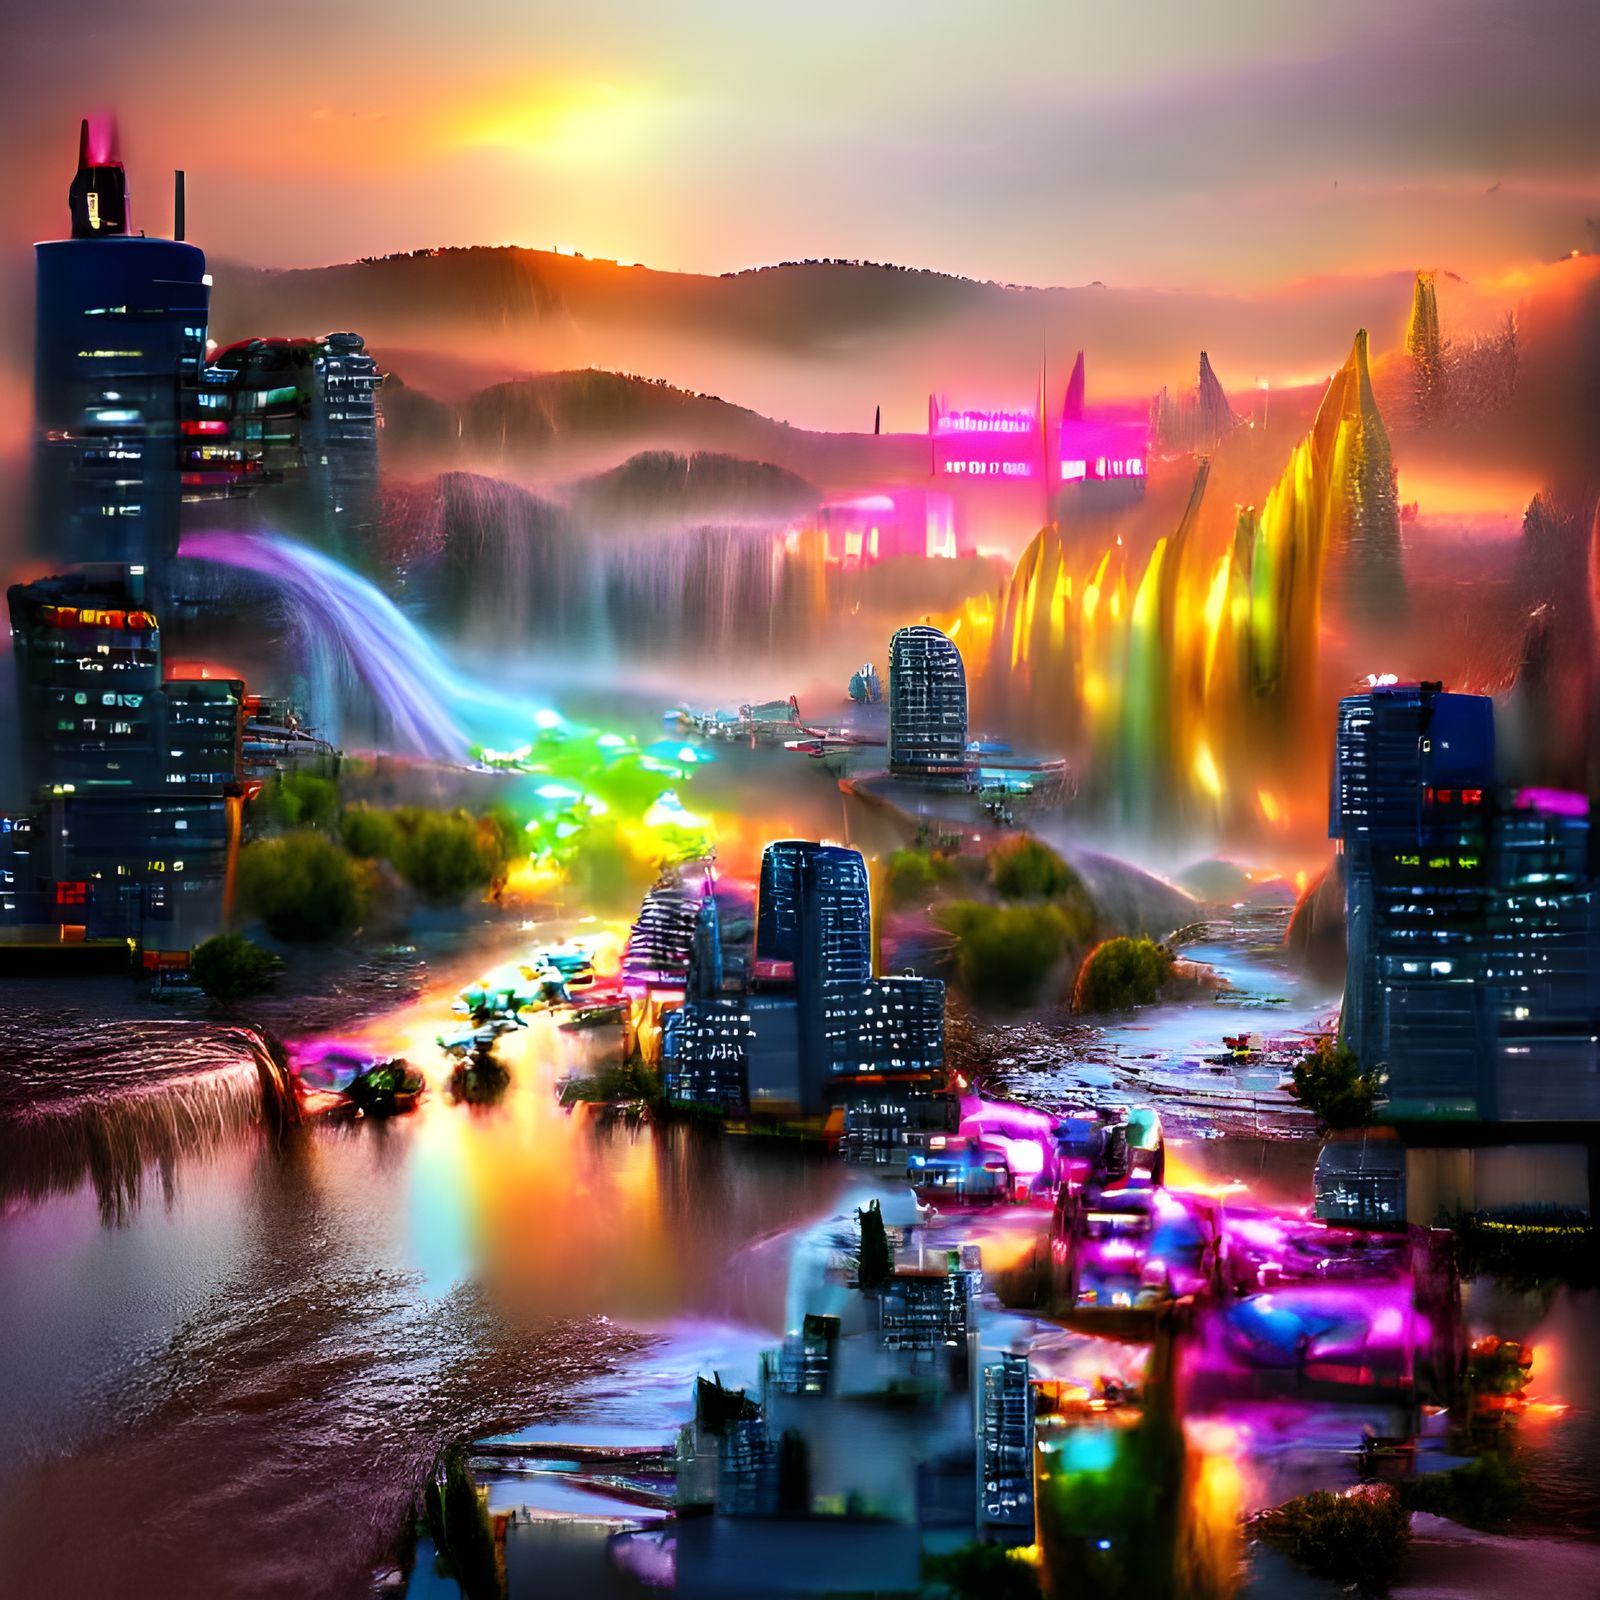 a golden cyberpunk city at sunset during fall filled with rainbow neon lights in a colorful dreamy rainbow nebula river and waterfall ambient occlusion